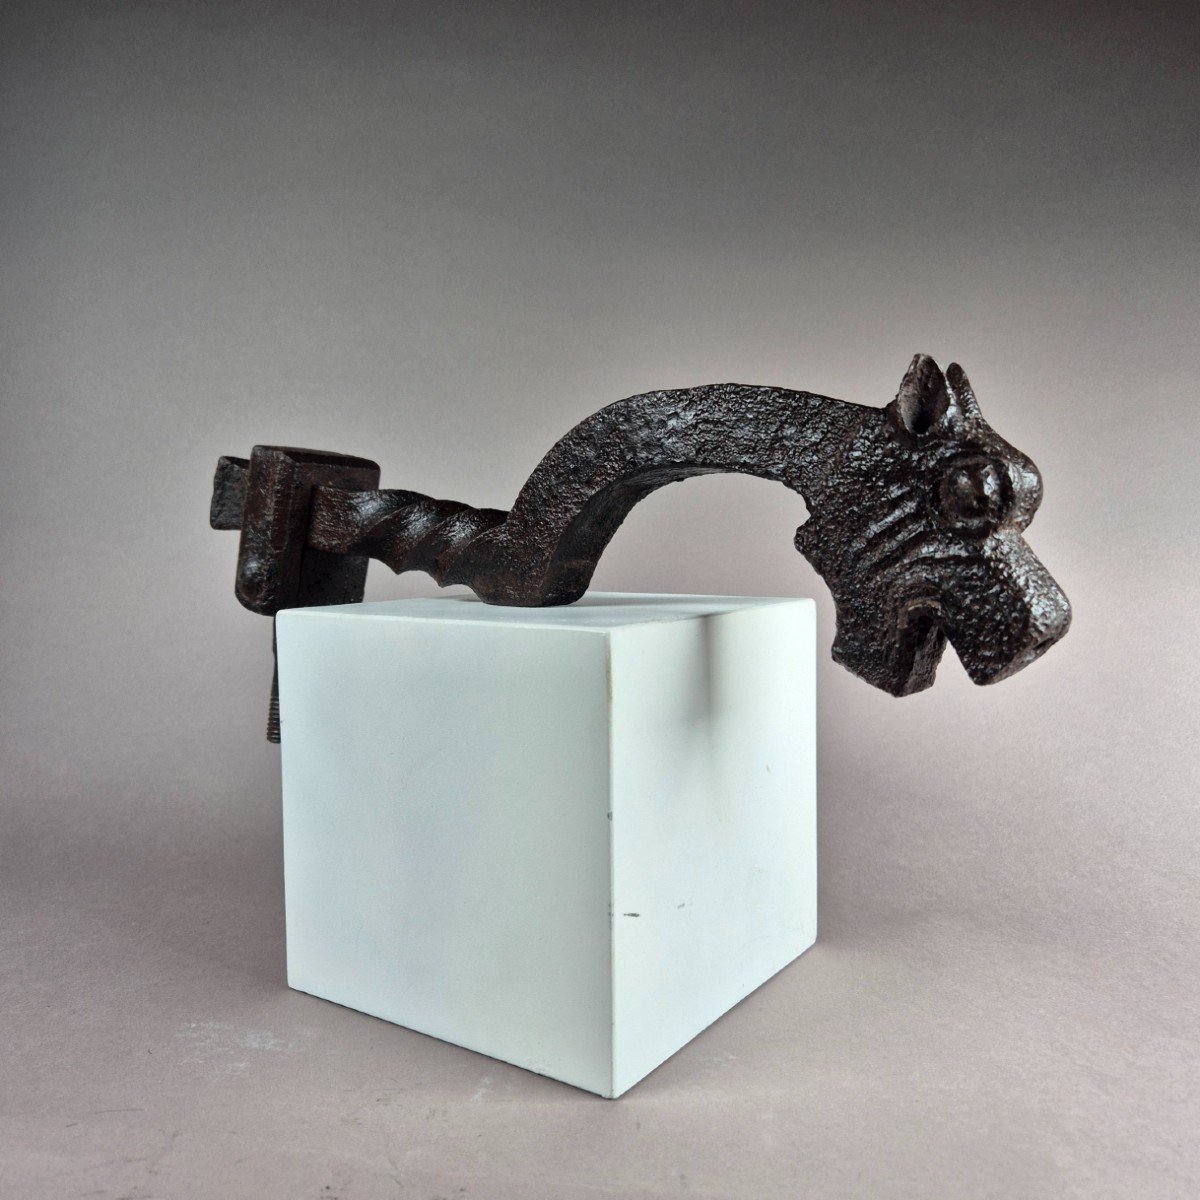 Wrought Iron Door Knocker In The Shape Of A Dragon, 17th Century-photo-3